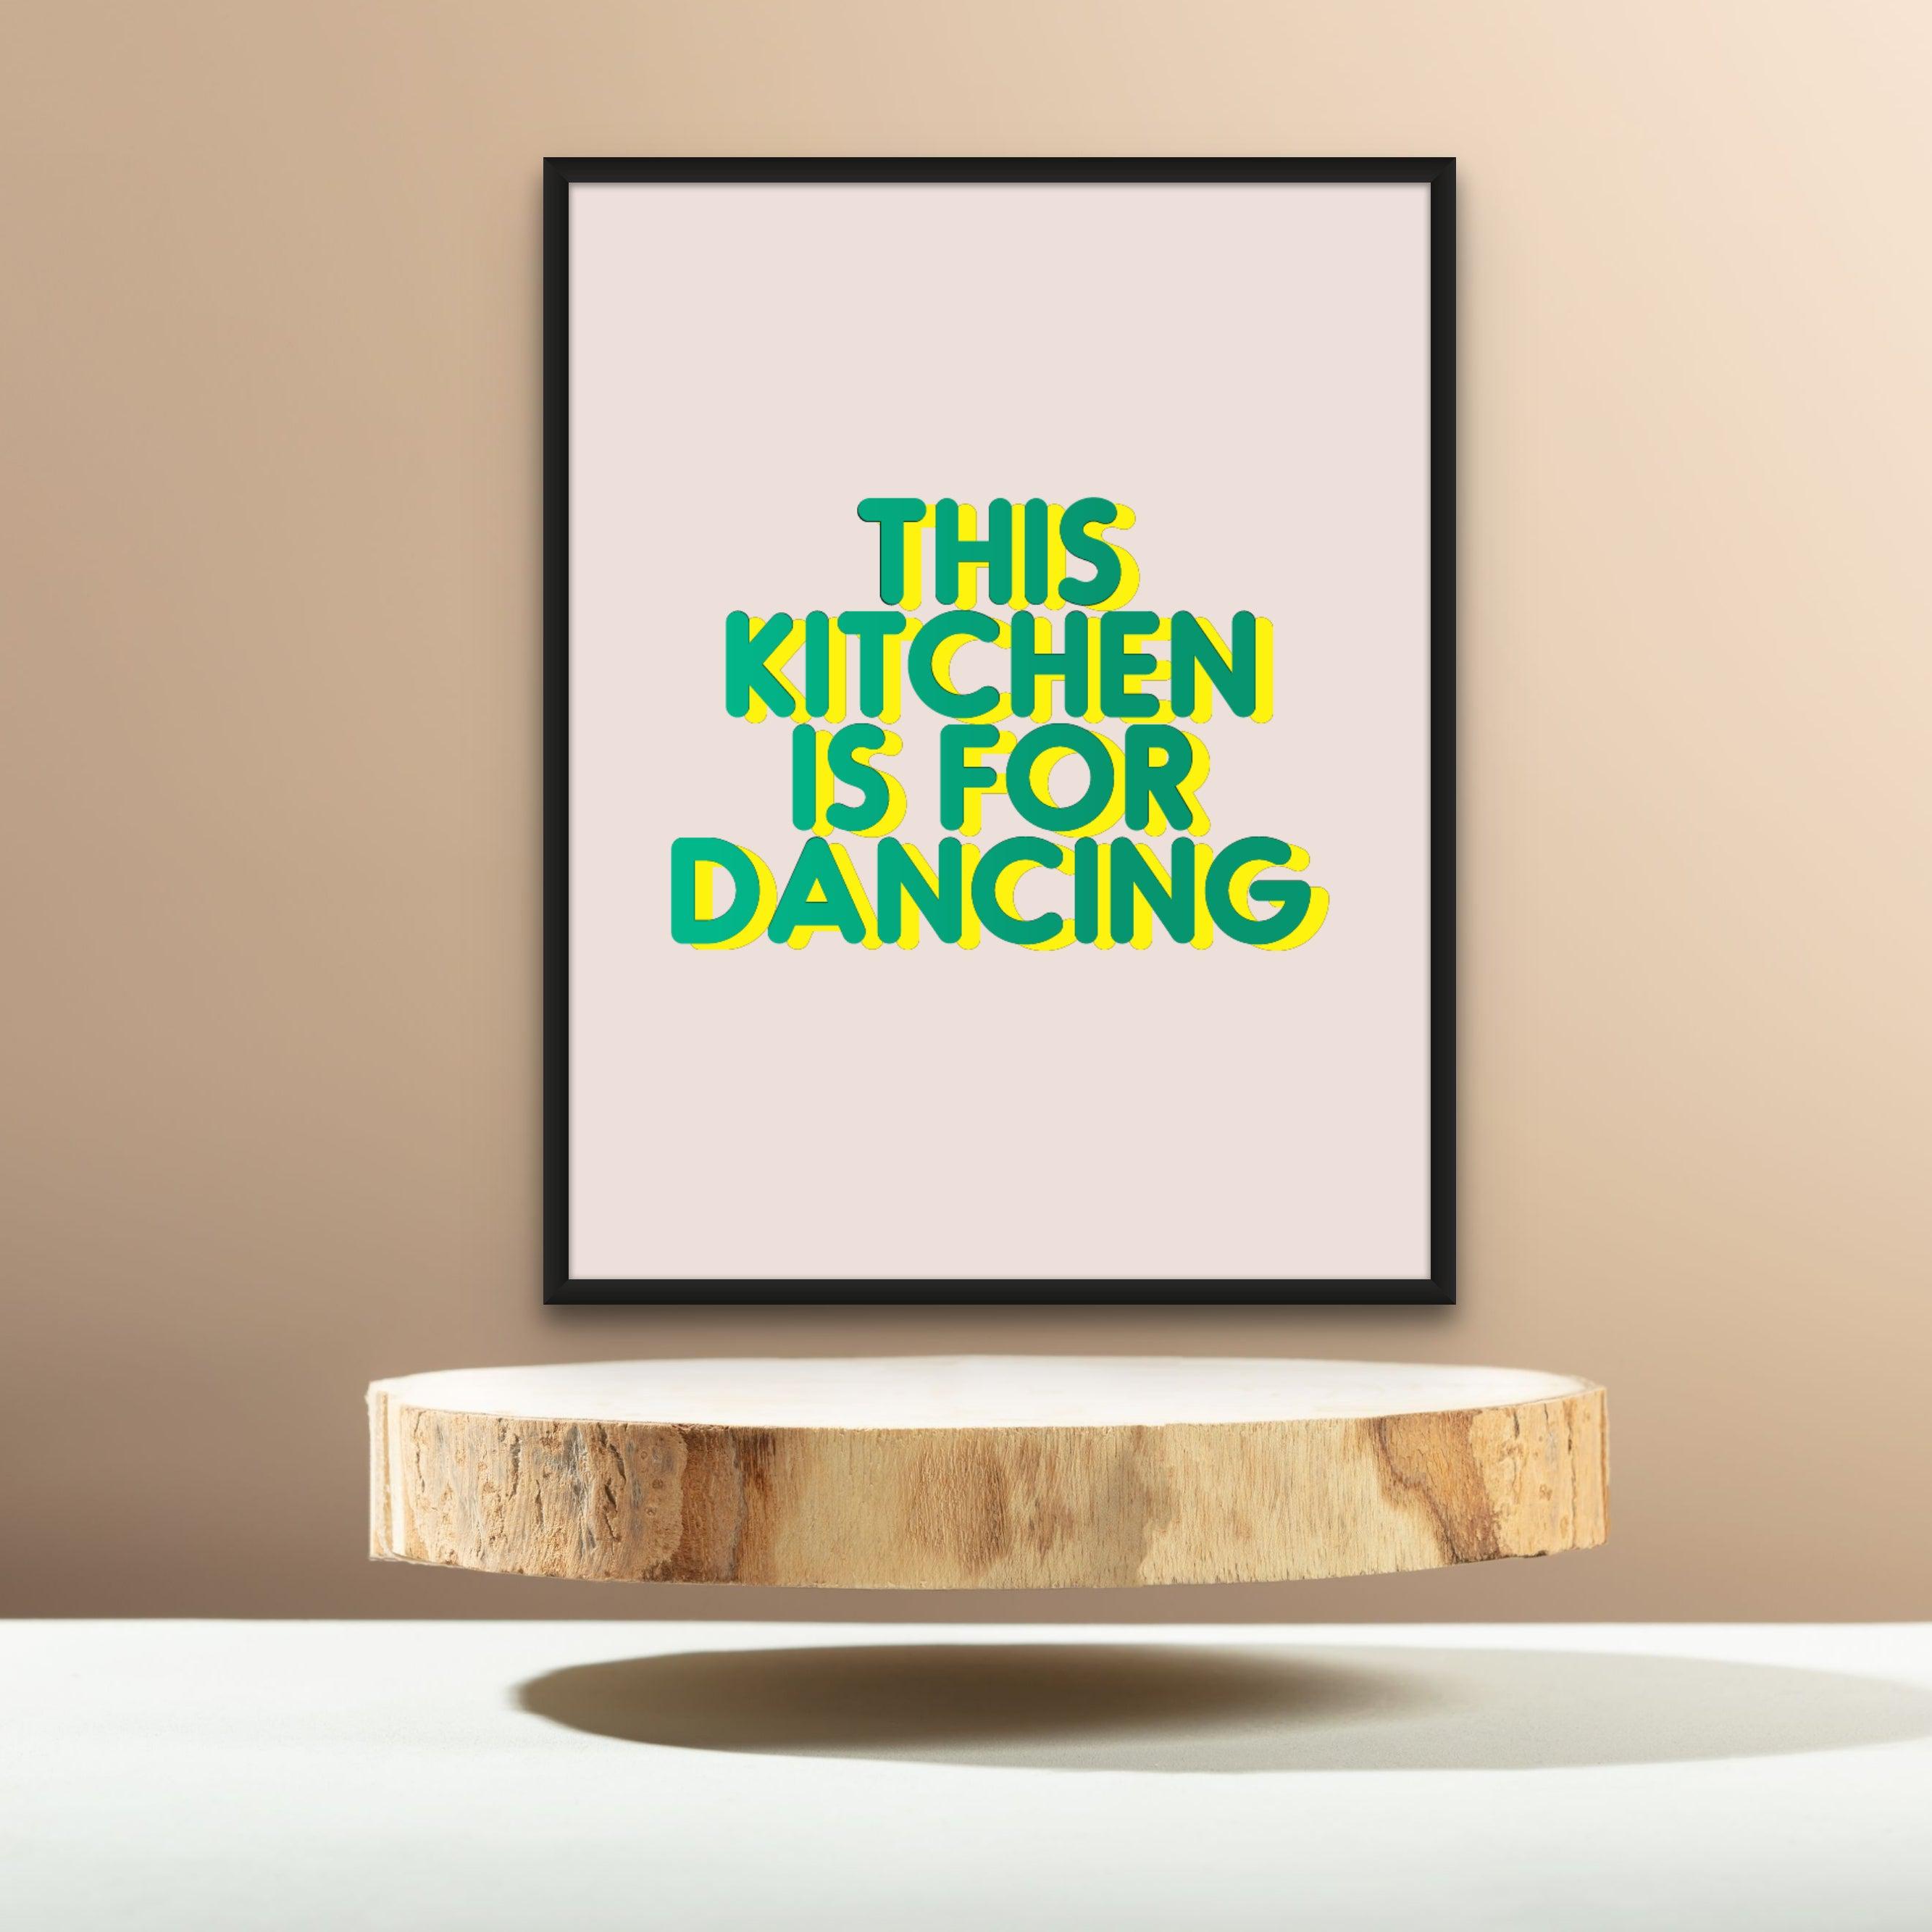 This kitchen is for dancing  (Smard X Anaya)